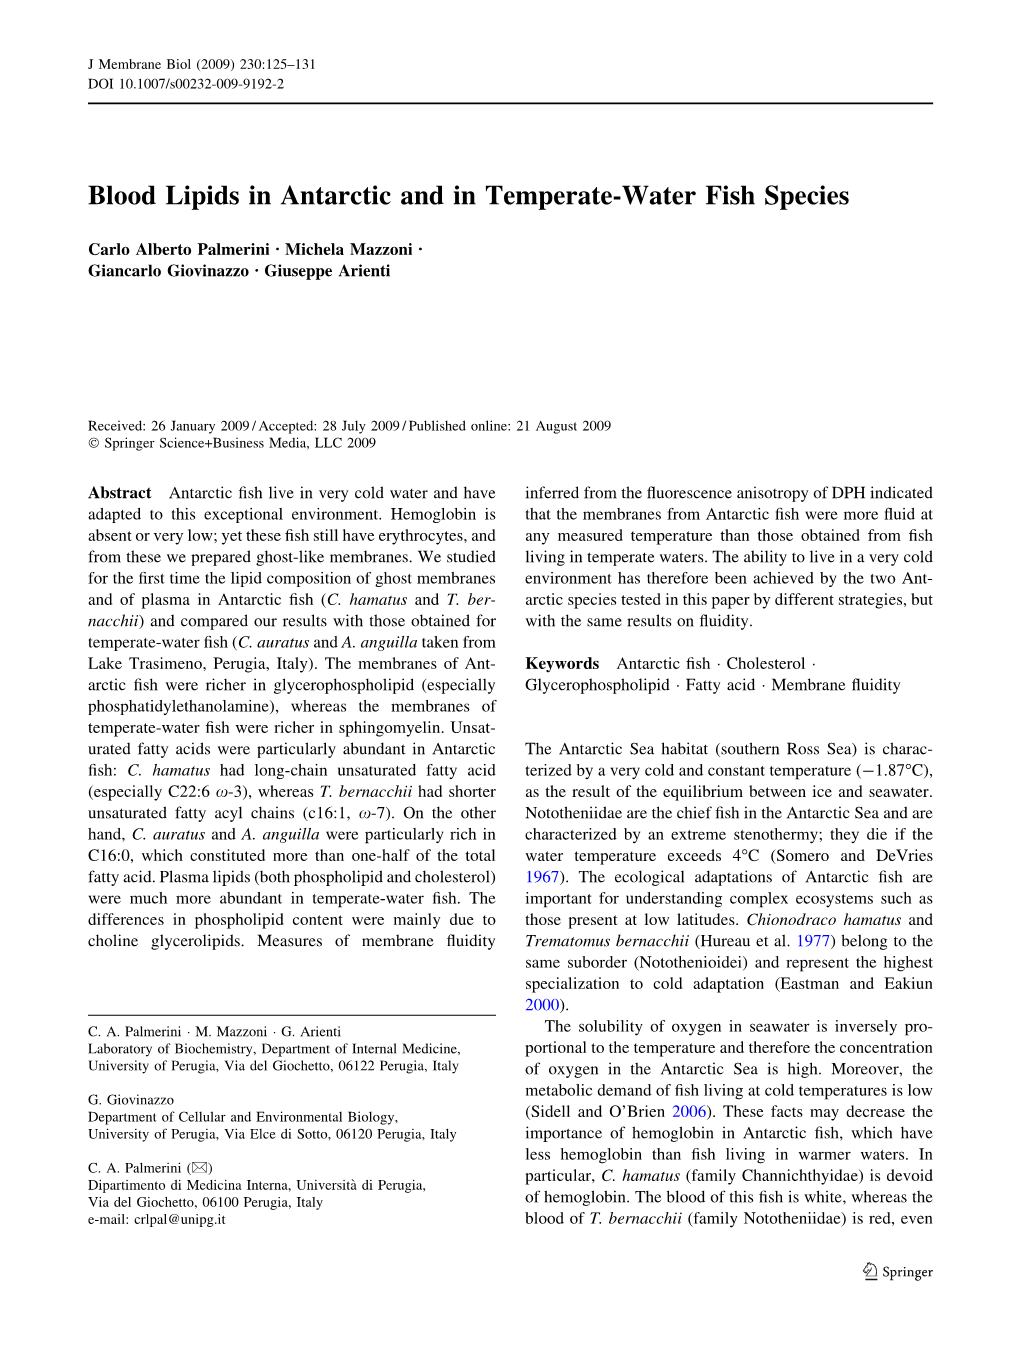 Blood Lipids in Antarctic and in Temperate-Water Fish Species